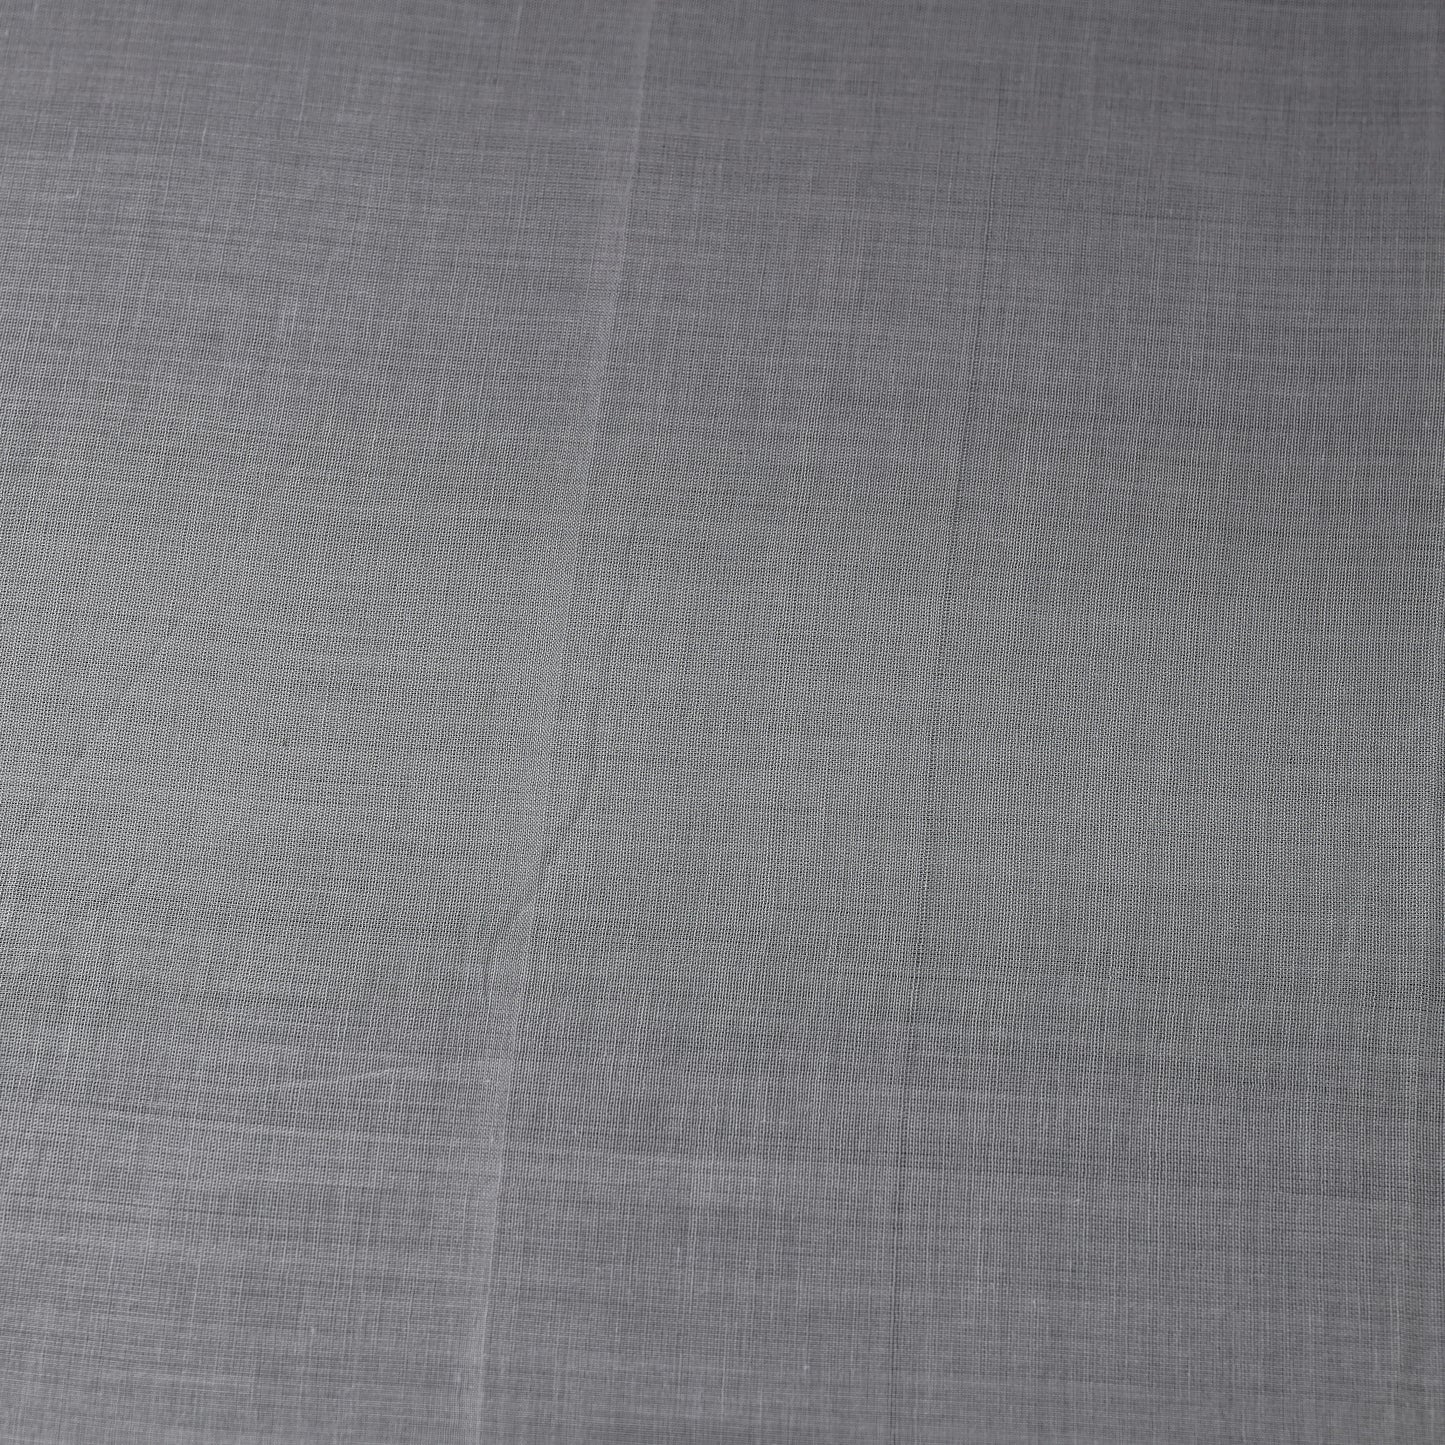 Grey - Pre Washed Plain Dyed Cotton Fabric